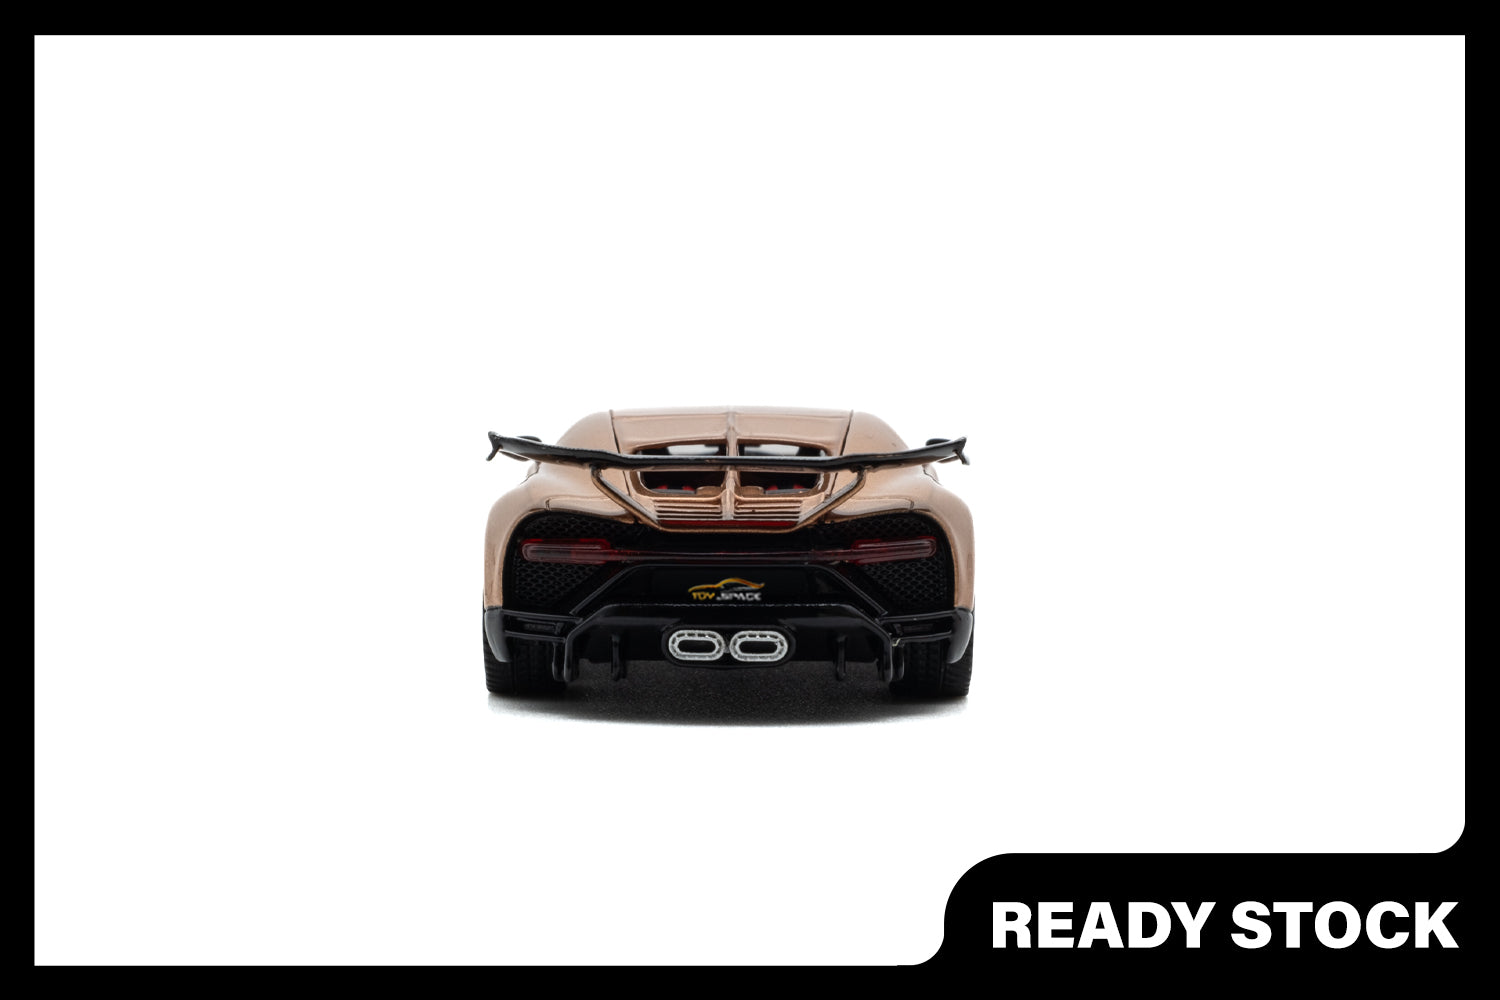 YM Model 1/64 Chiron Pur Sport - Fantasy Rose Gold [Limited 299 pcs]